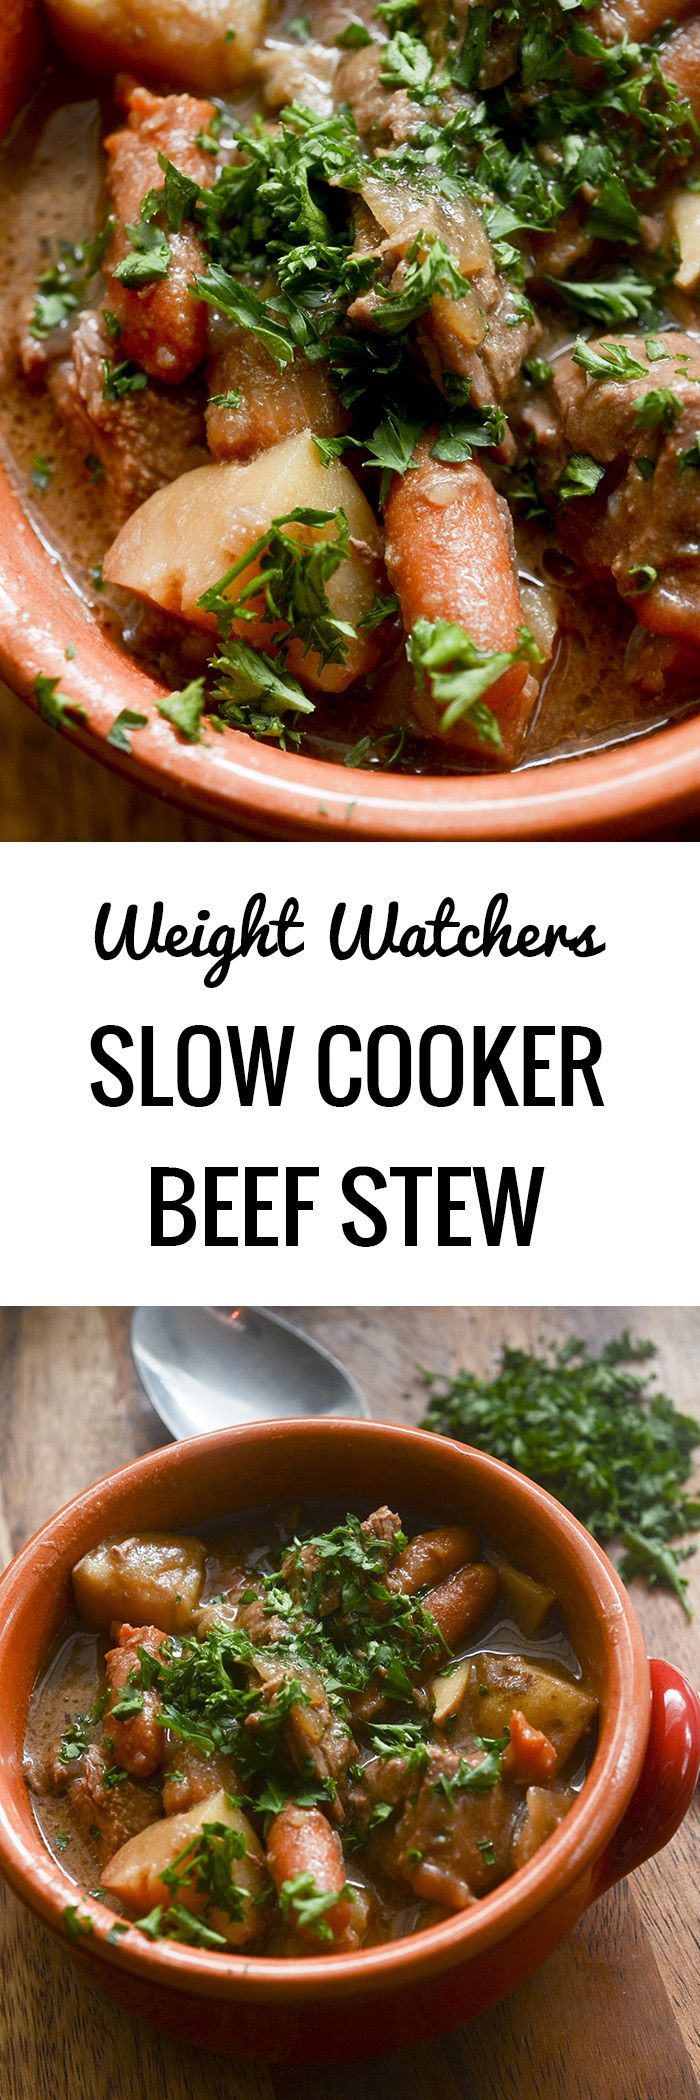 Weight Watcher Beef Stew
 6689 best images about Weight Watchers Healthy Low Fat